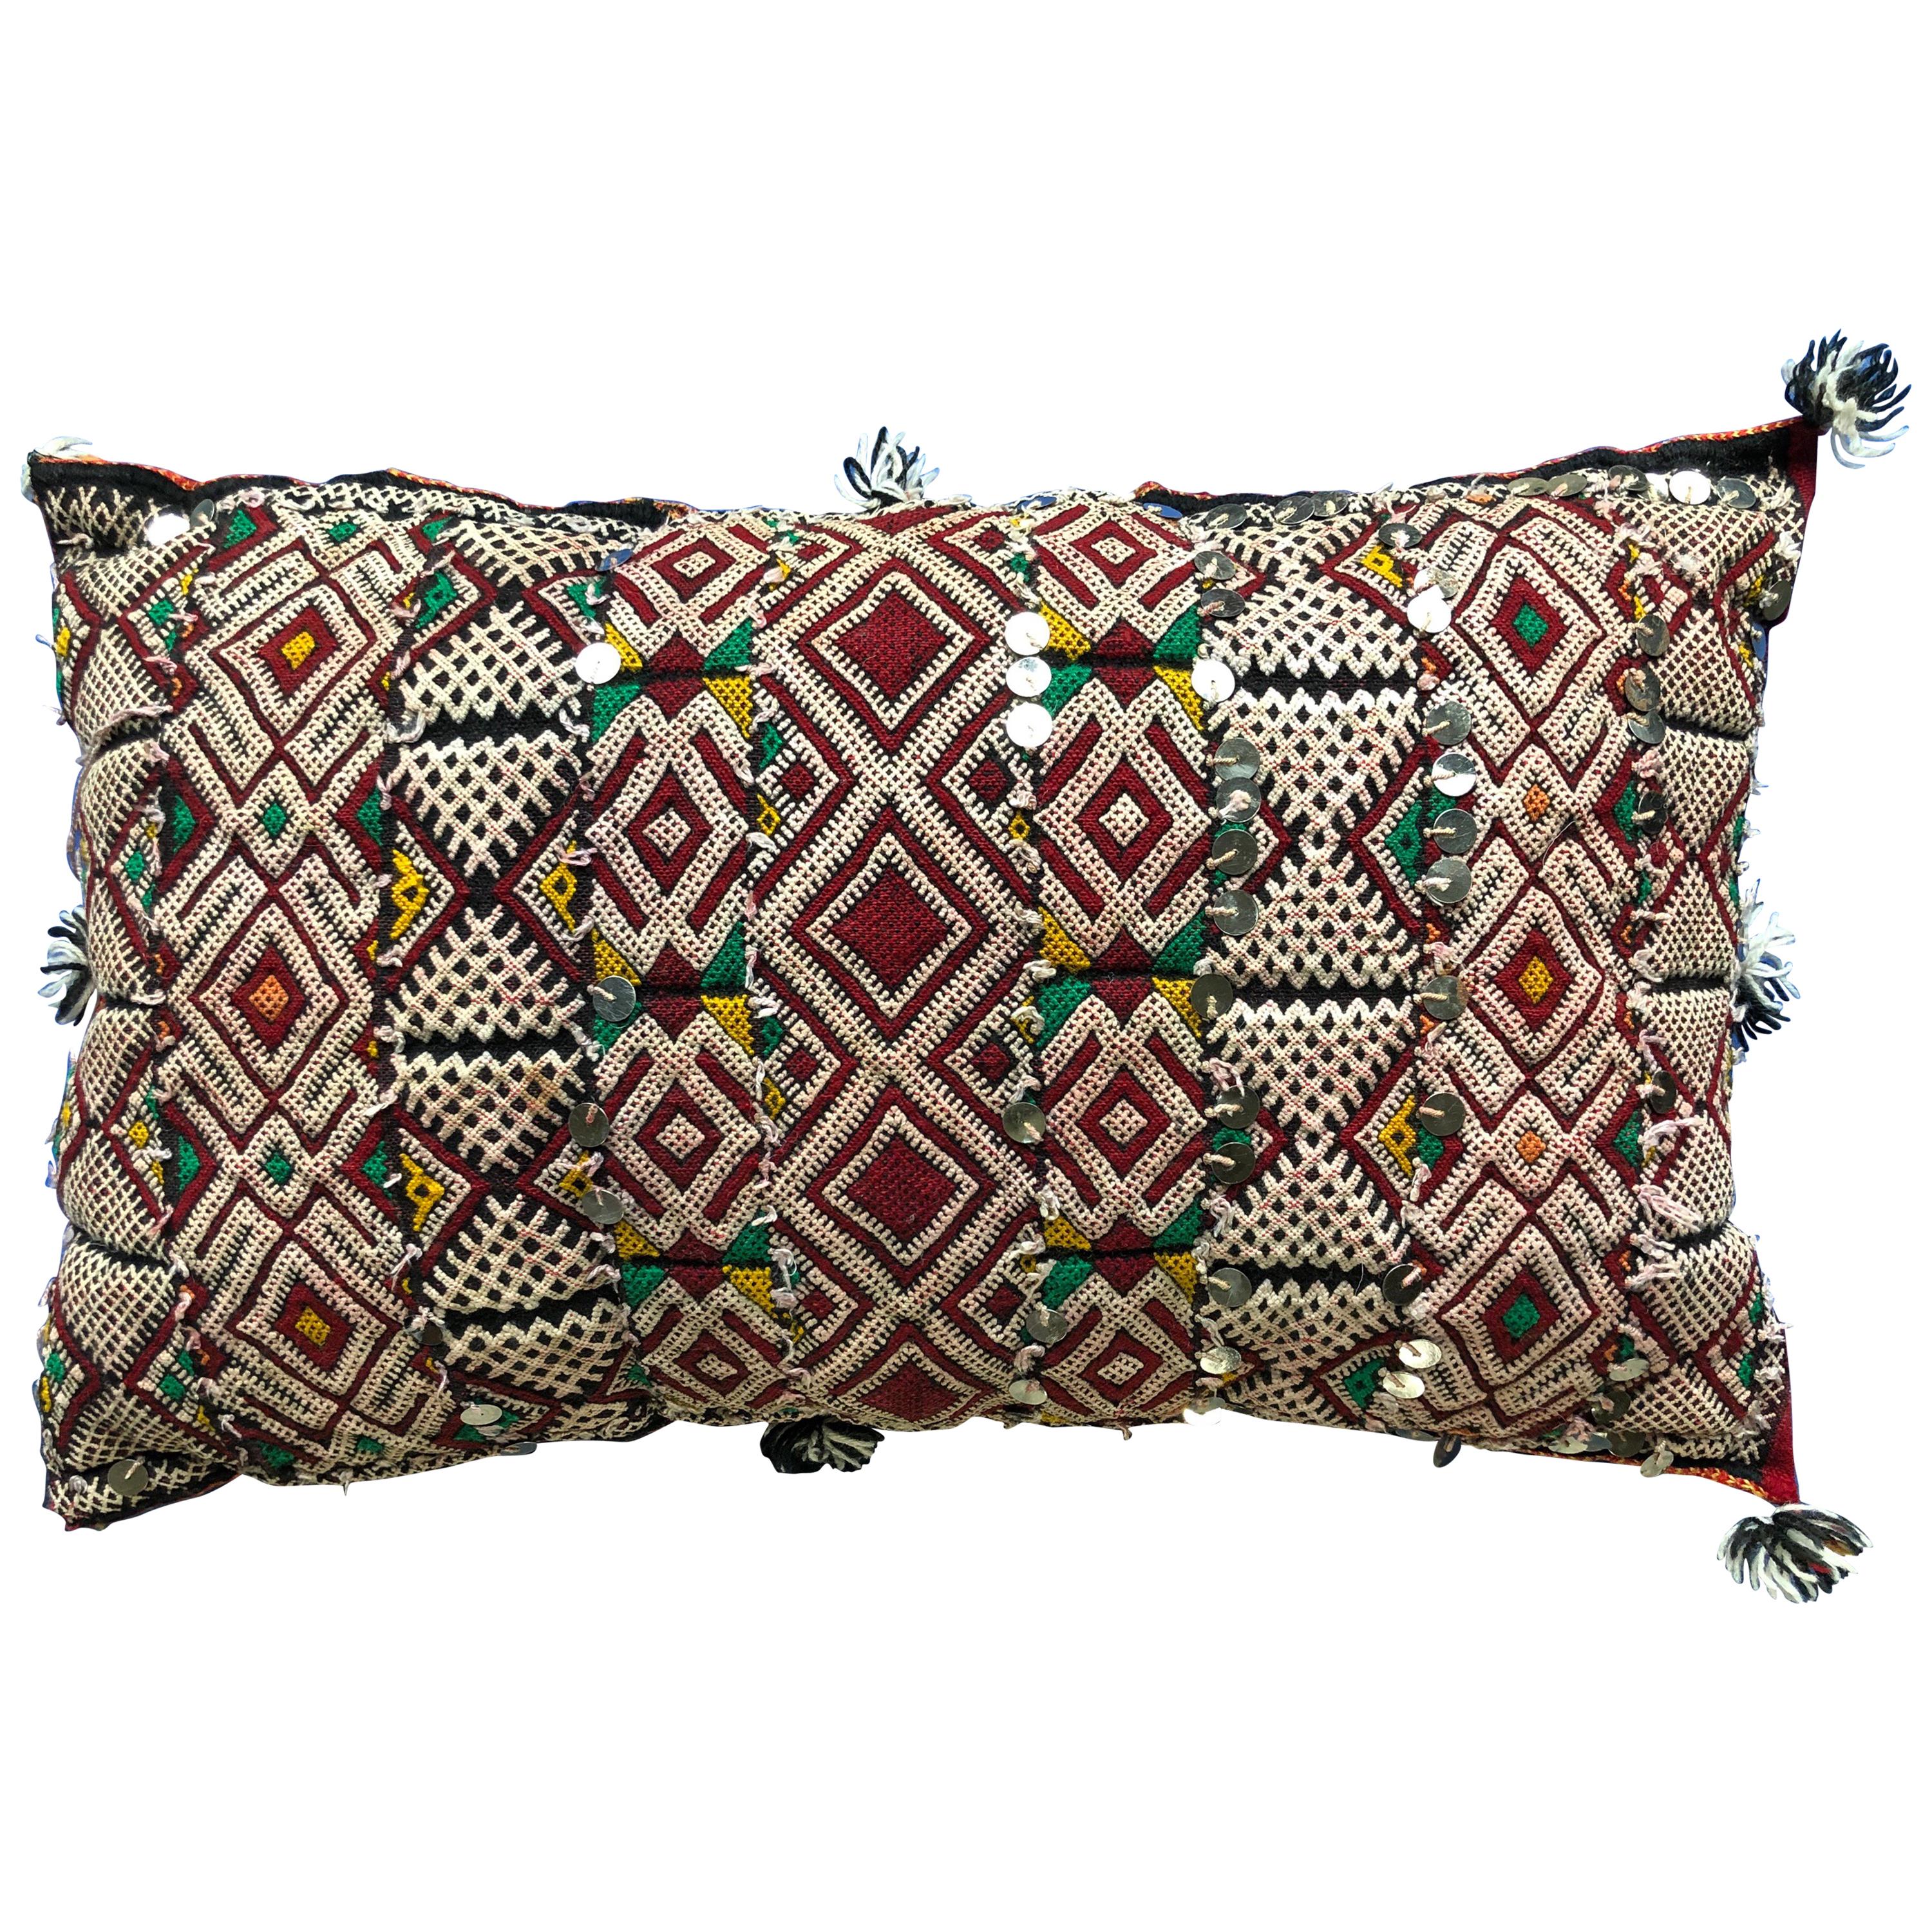 Vintage Moroccan Kilim Sequined Throw Pillow Handwoven Wool Berber Tribal Boho For Sale